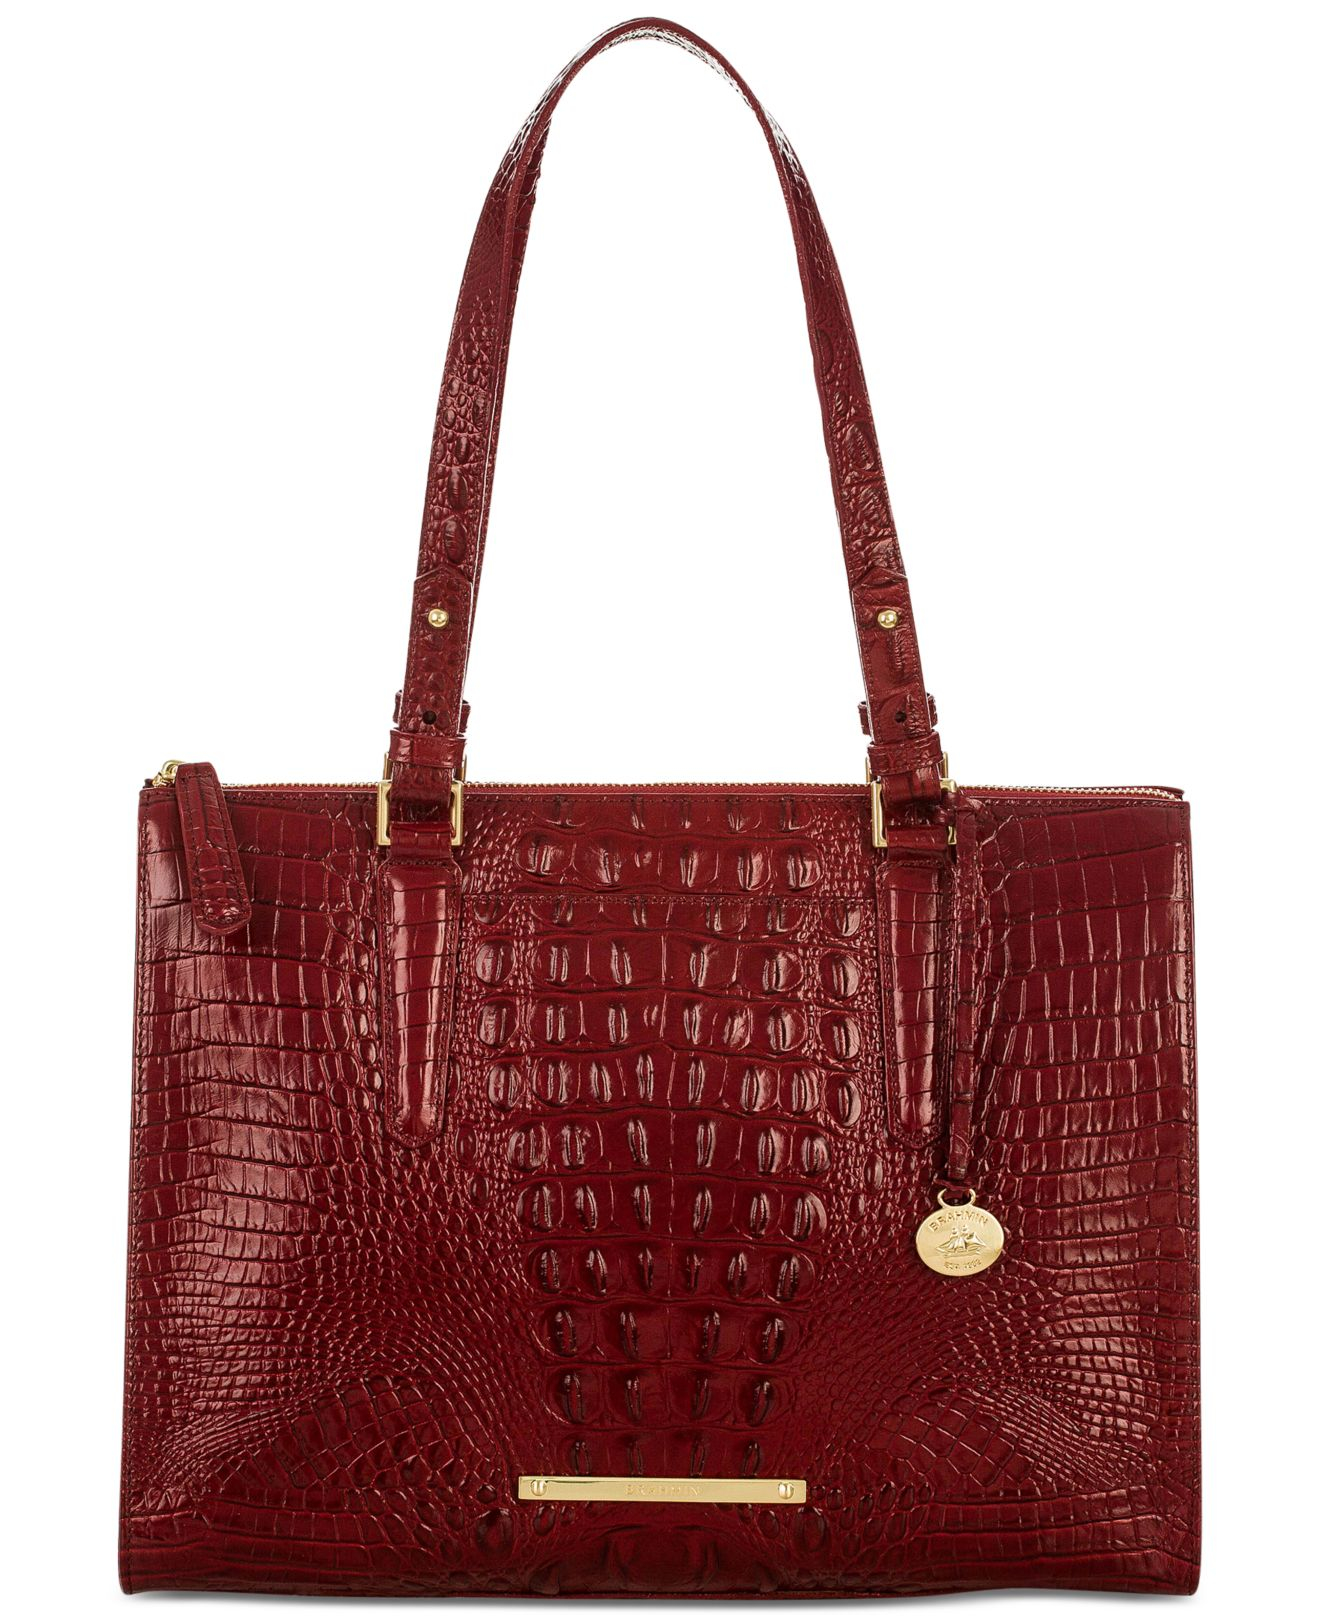 Lyst - Brahmin Melbourne Anywhere Tote in Red